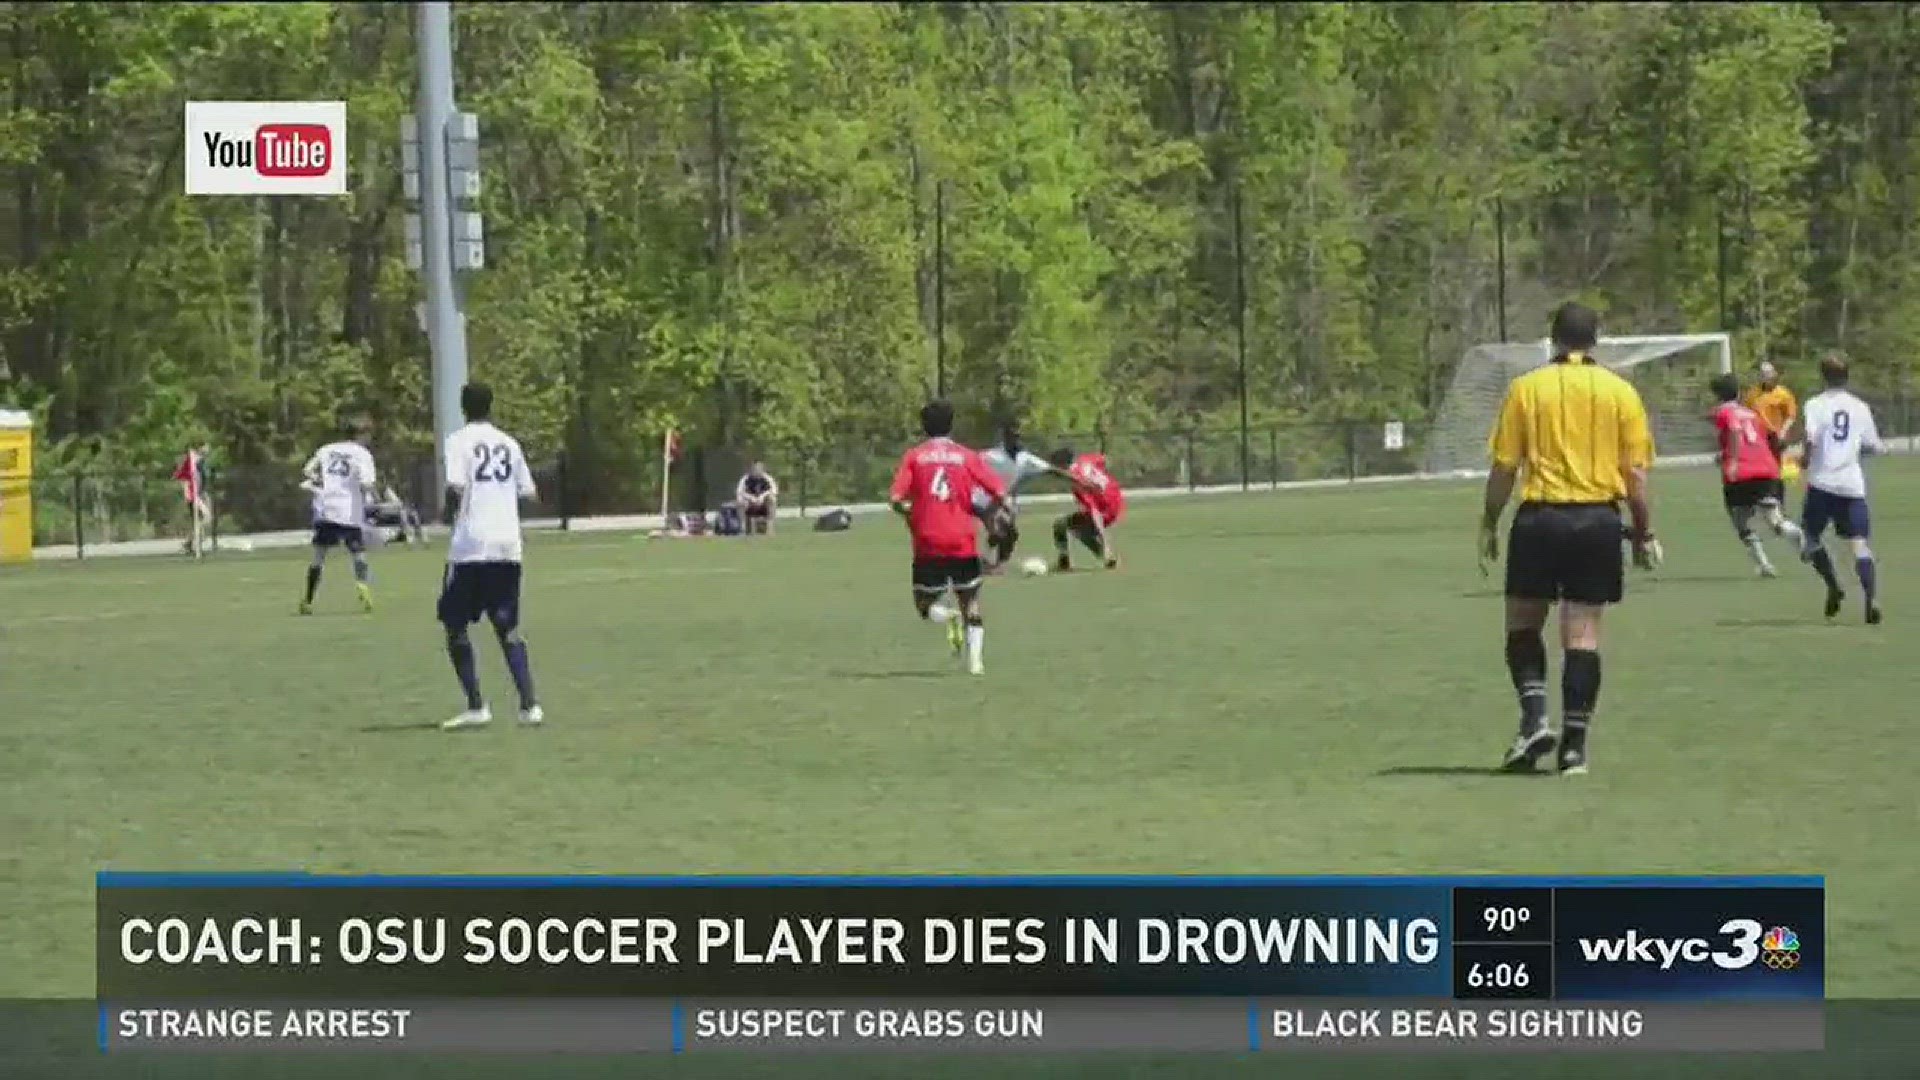 Coach: OSU Soccer player dies in drowning